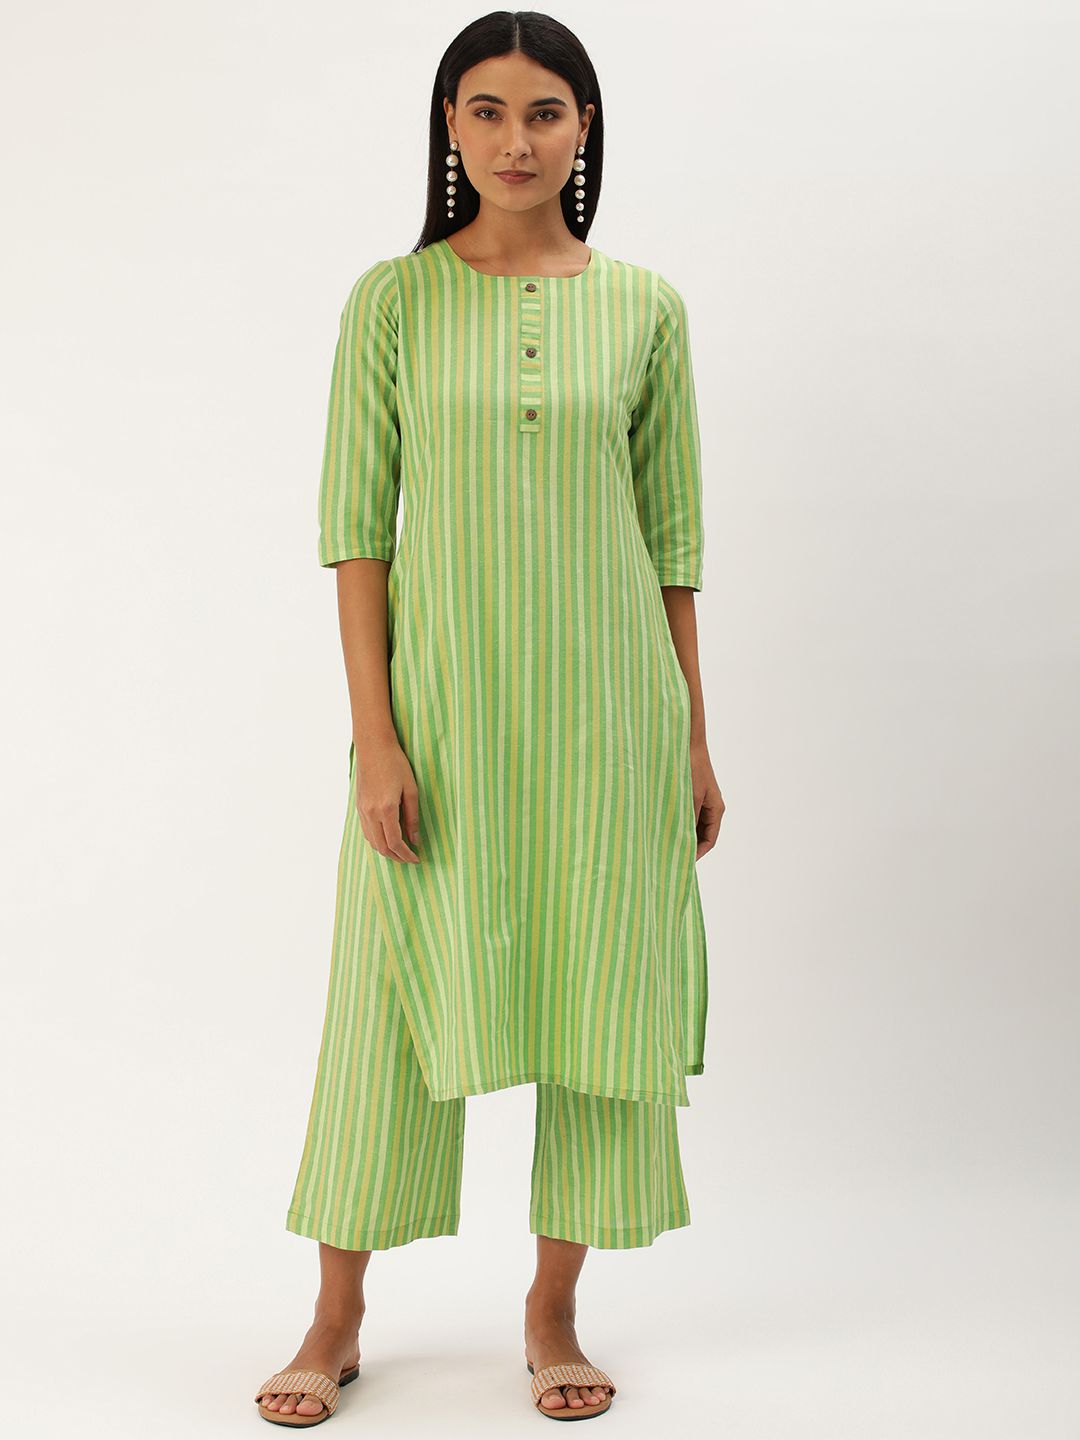     			Aarrah Cotton Striped Kurti With Pants Women's Stitched Salwar Suit - Green ( Pack of 1 )